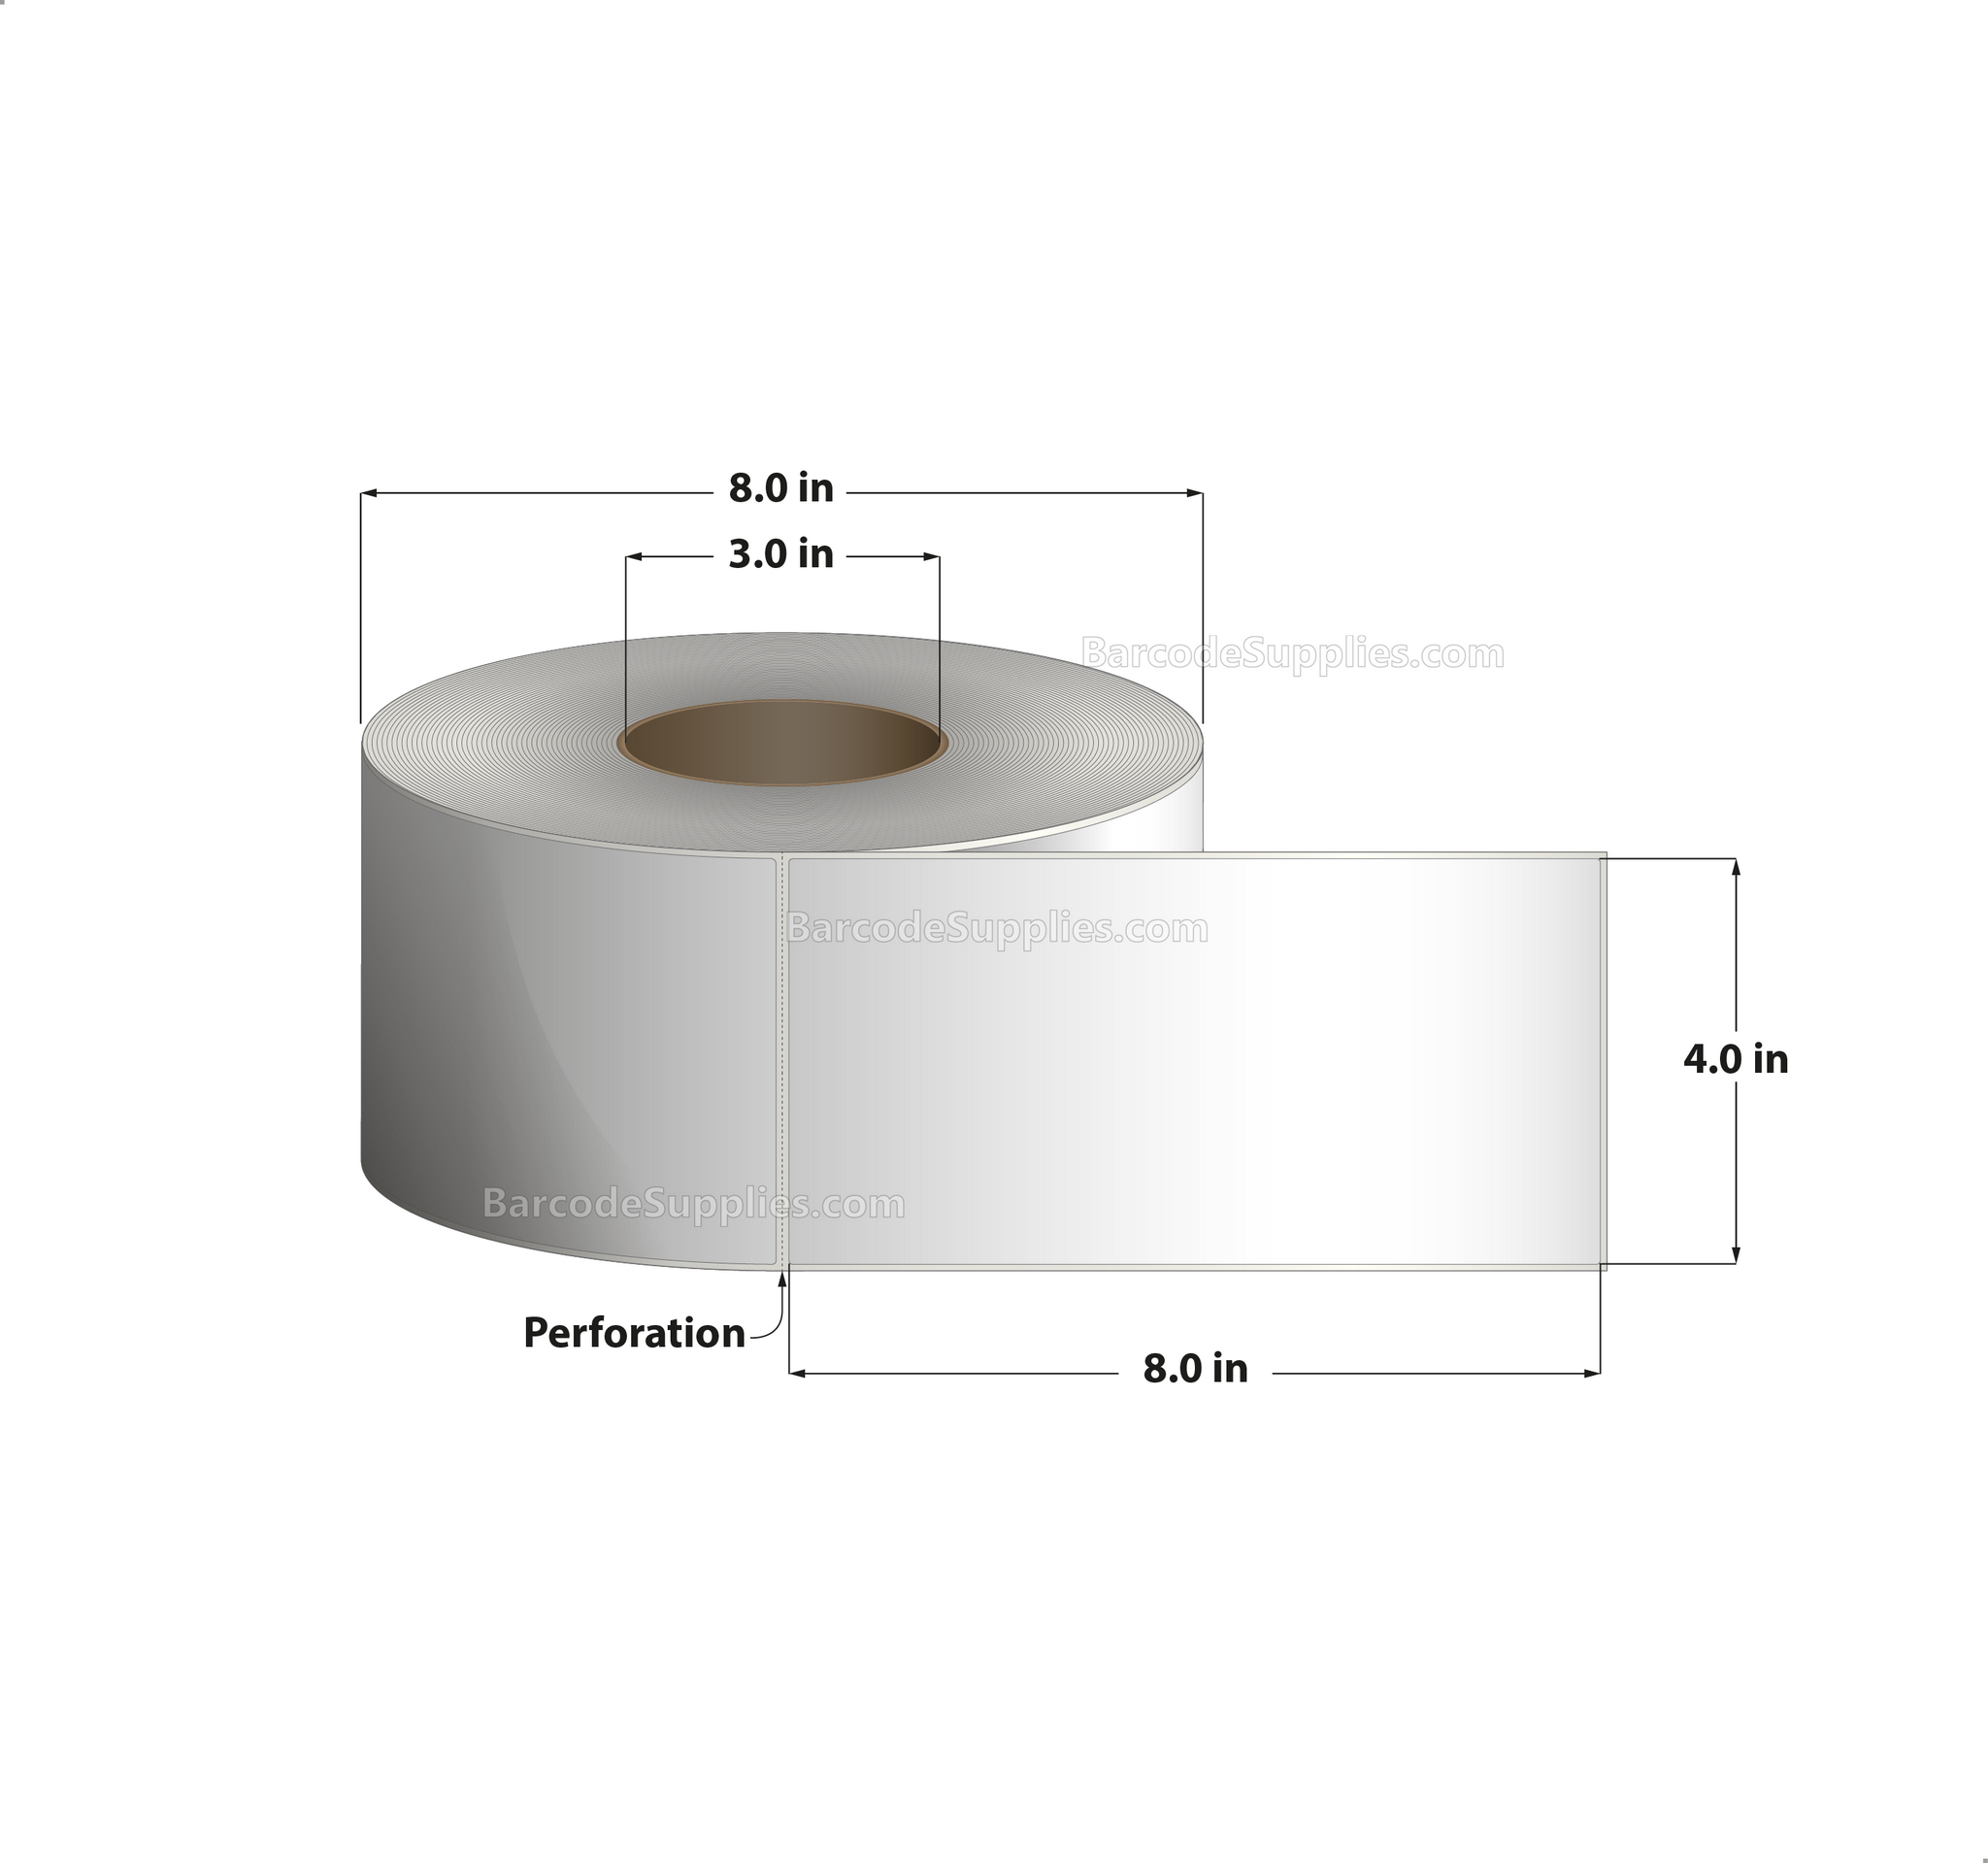 4 x 8 Thermal Transfer White Labels With Permanent Acrylic Adhesive - Perforated - 750 Labels Per Roll - Carton Of 4 Rolls - 3000 Labels Total - MPN: TH48-1P